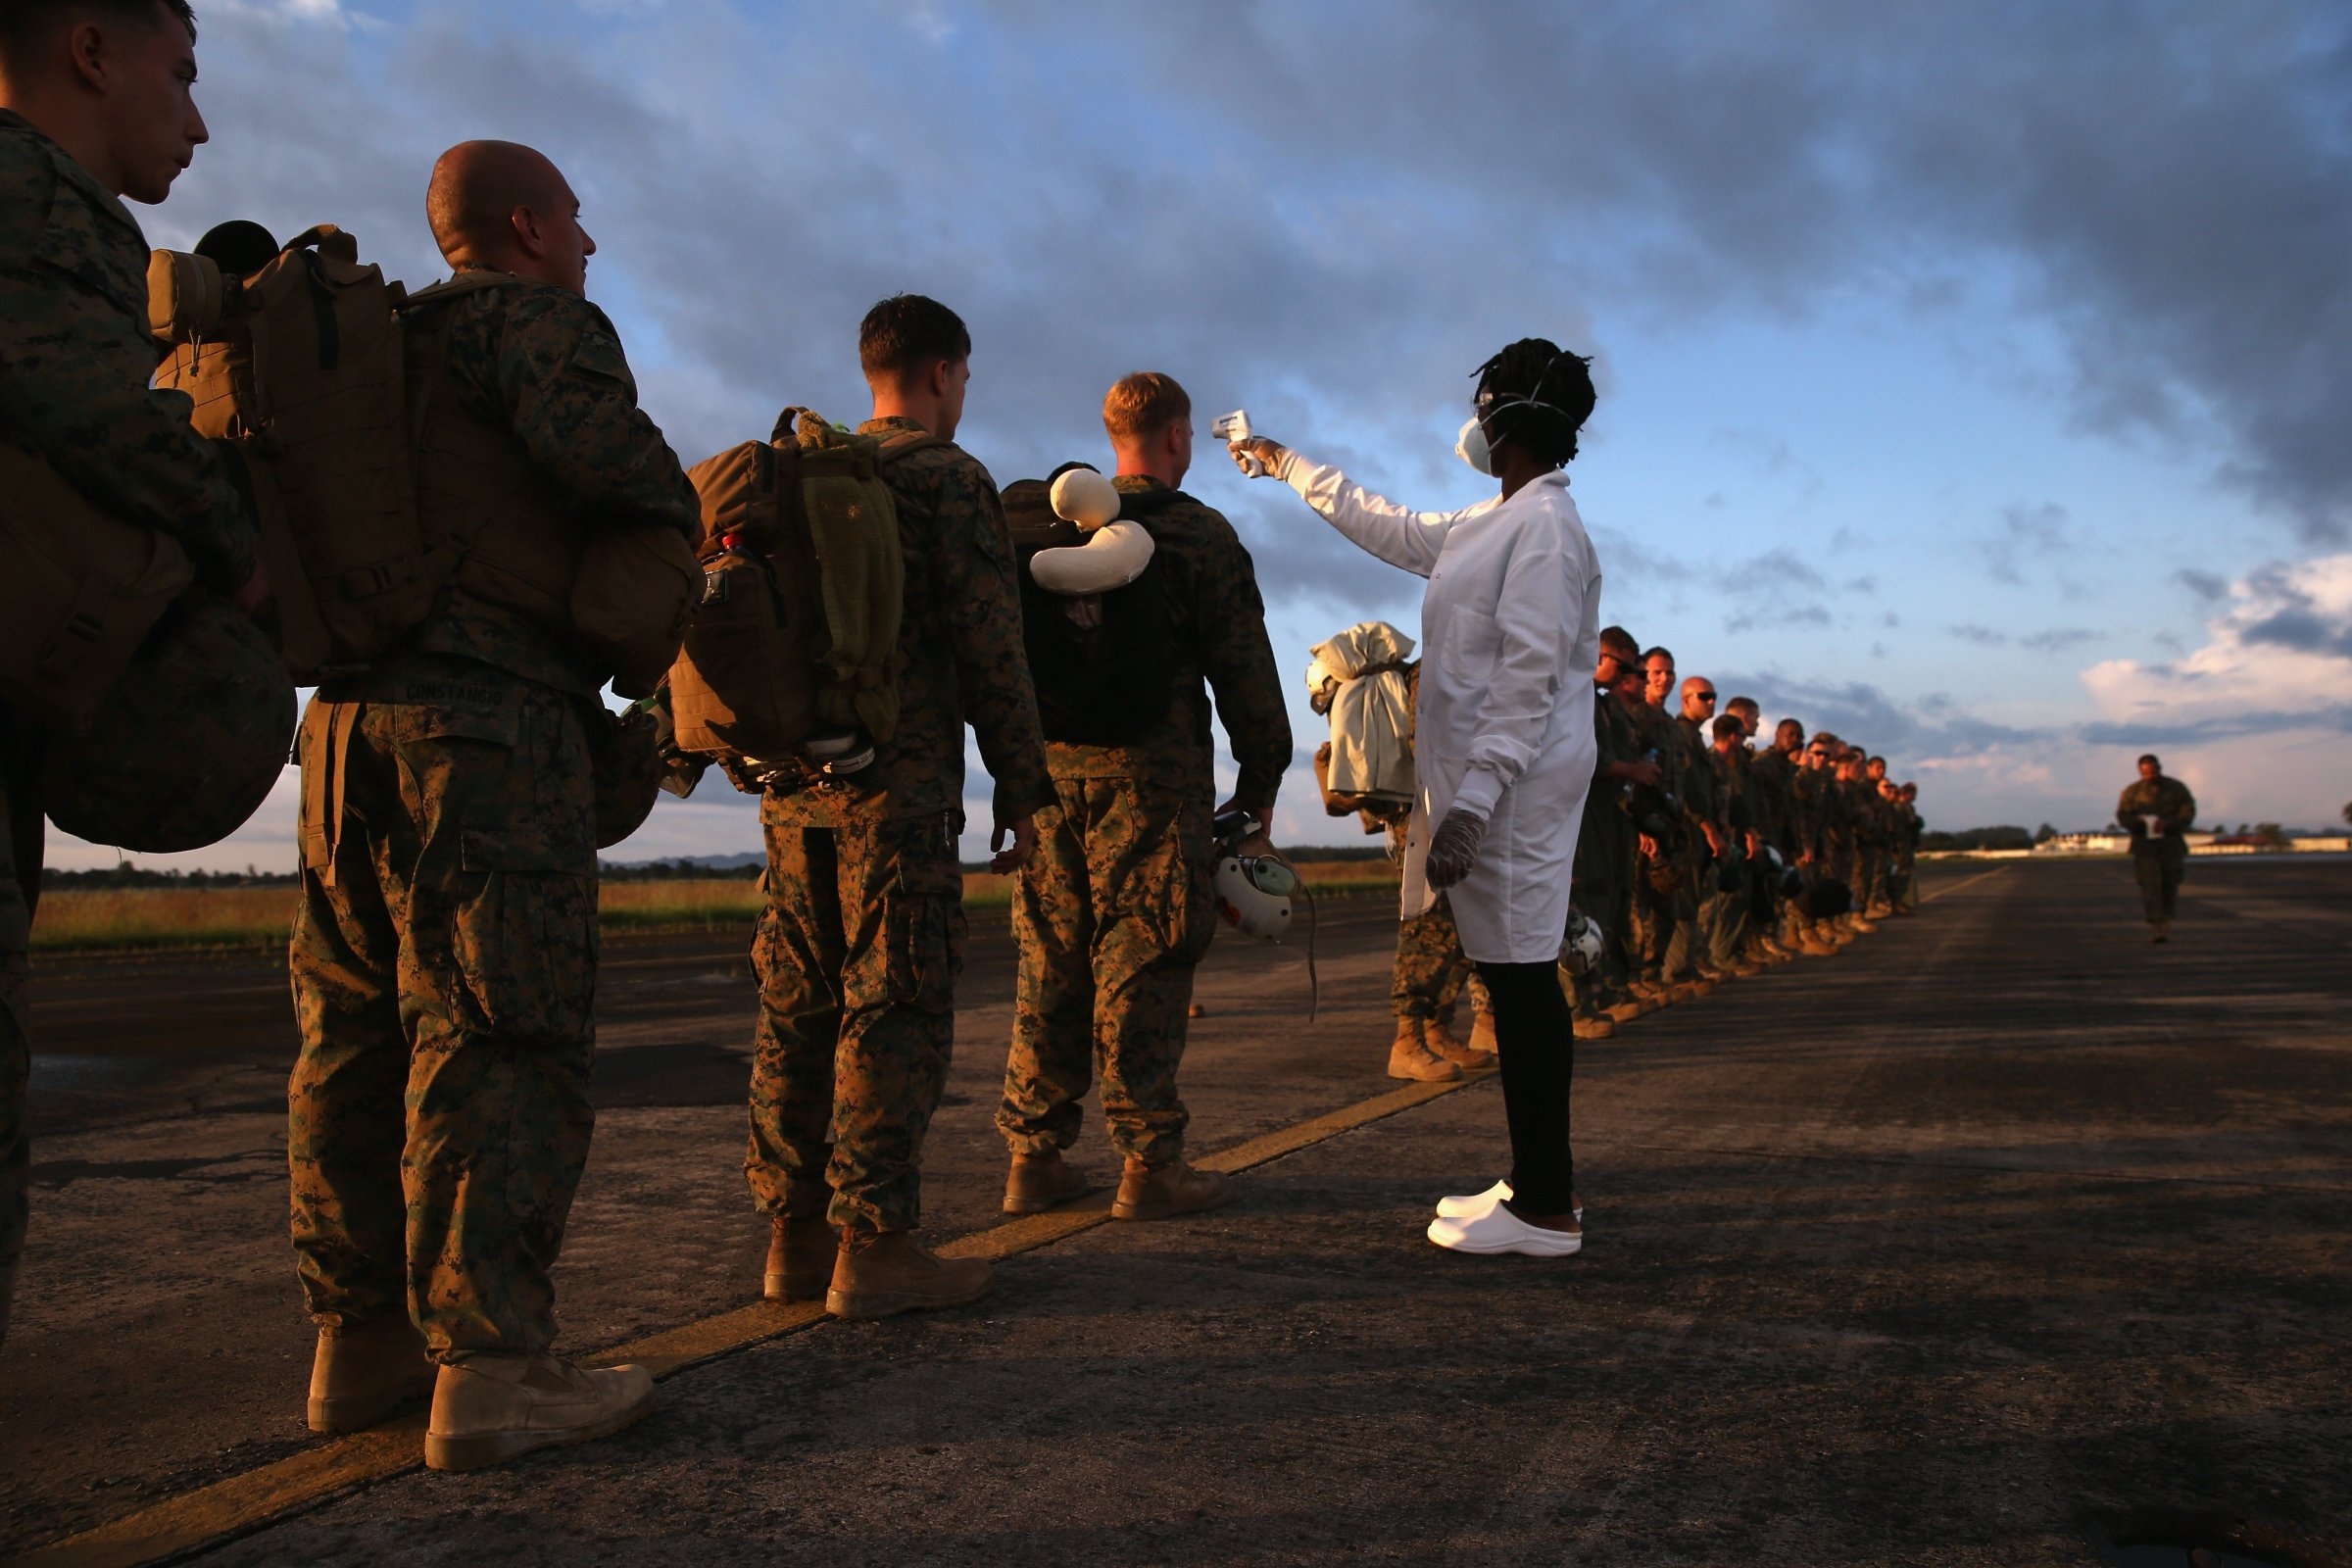 A health worker takes the temperature of U.S. Marines arriving to take part in Operation United Assistance on Oct. 9, 2014 near Monrovia, Liberia.